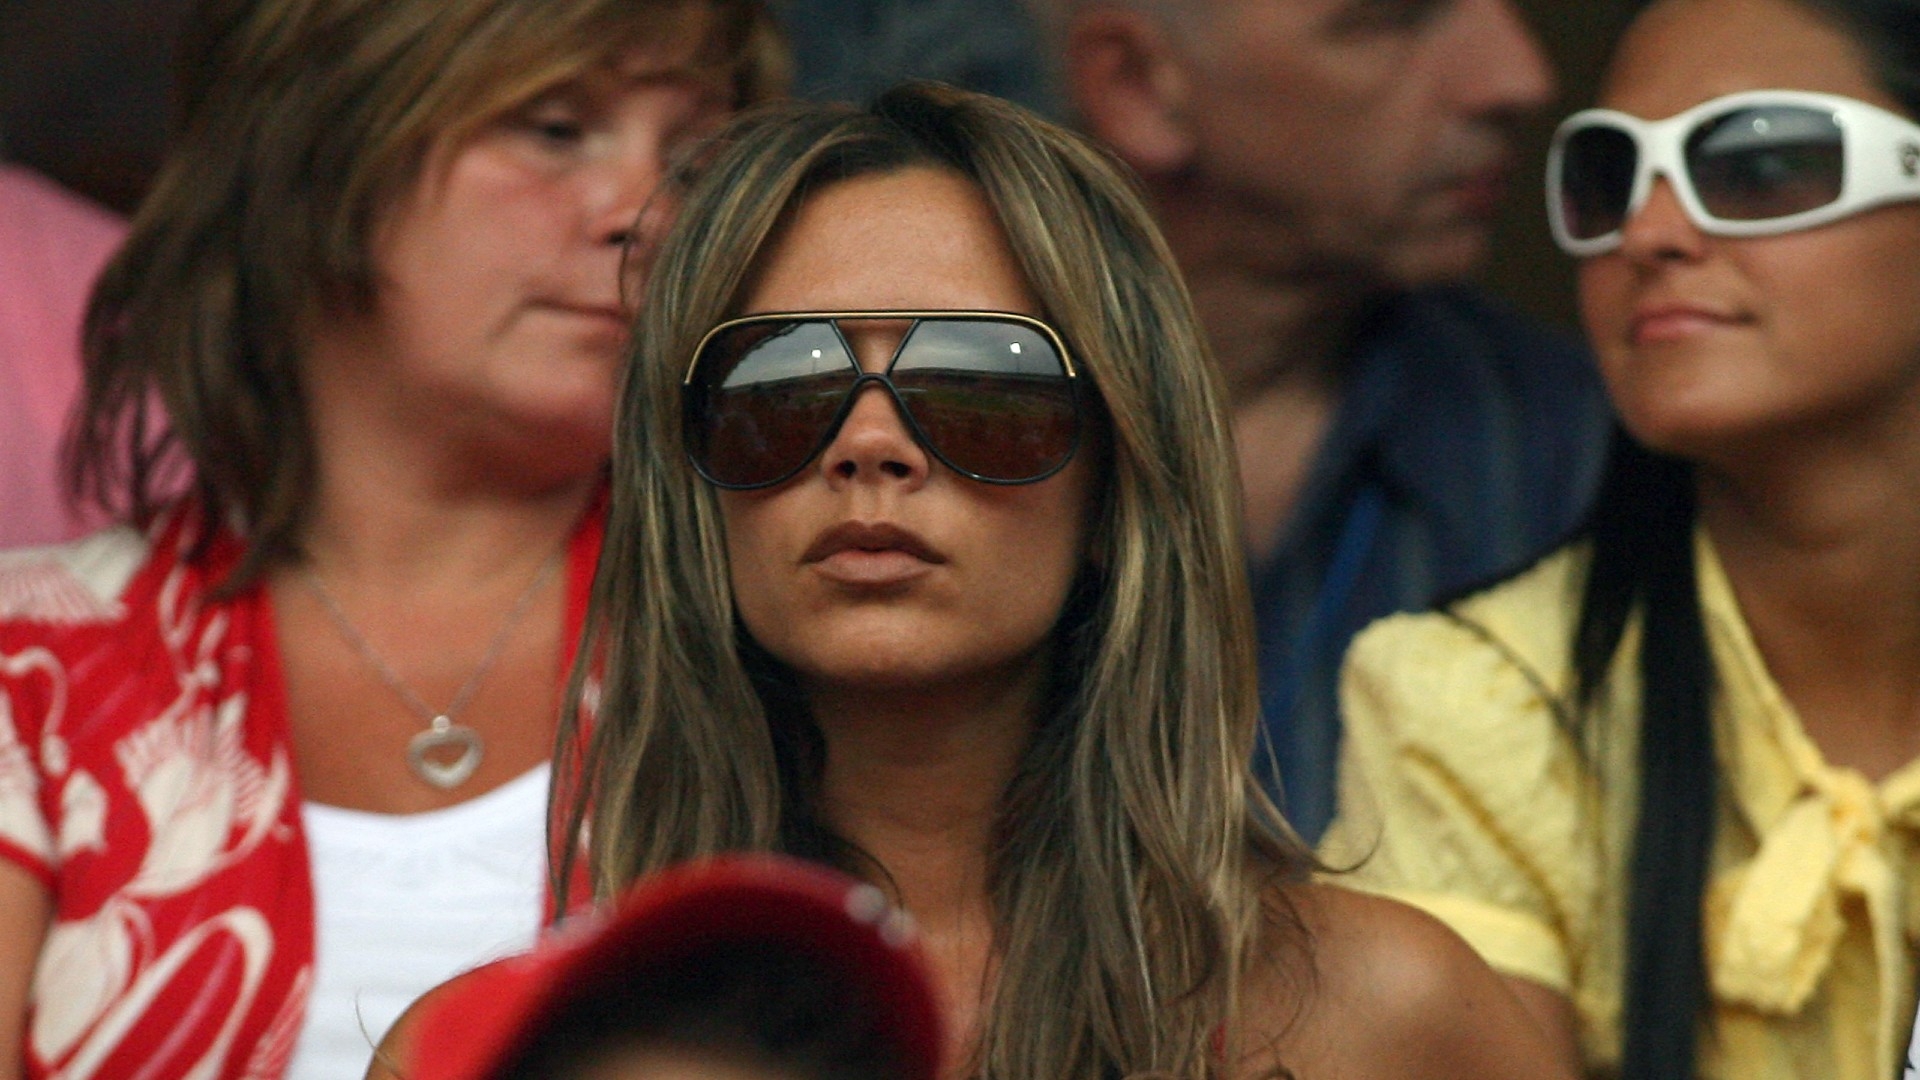 Fashion designer and singer Victoria Beckham watches her husband David during a World Cup match in Nuremberg on 15 June 2006 (AFP/File photo)